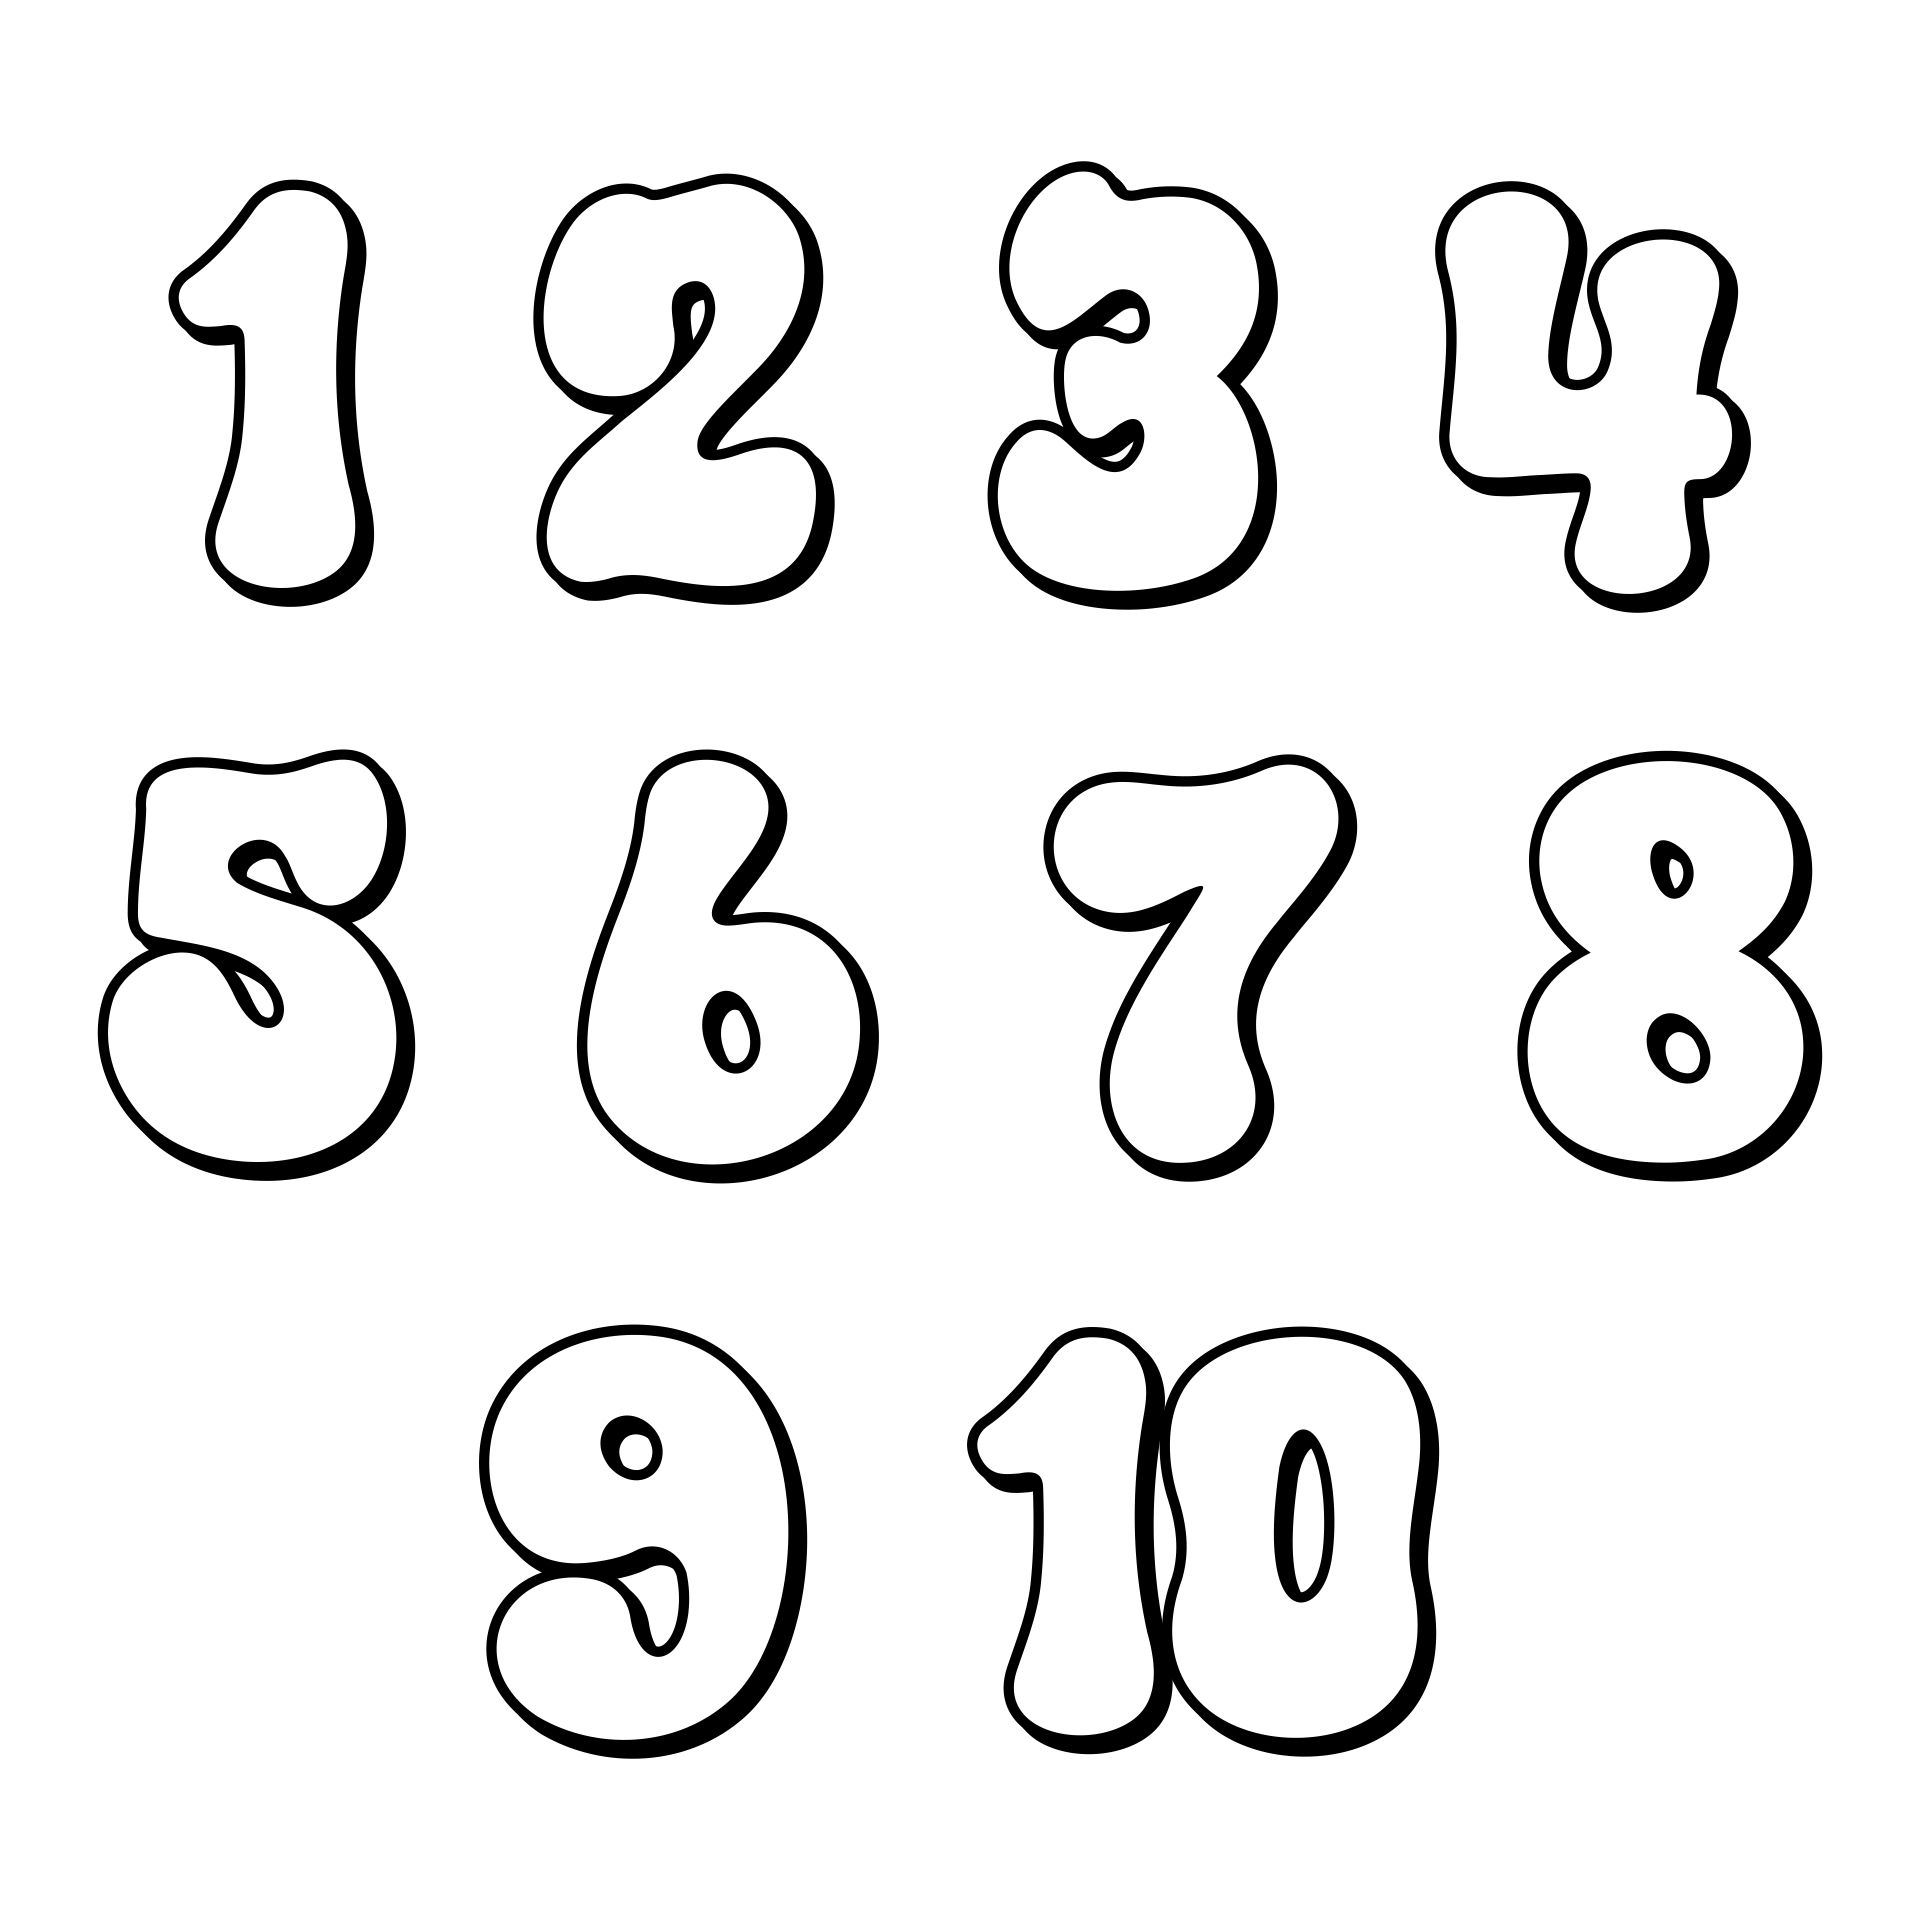 Number coloring page 1,2,3,4,5,6,7,8,9,10 17069054 Vector Art at Vecteezy